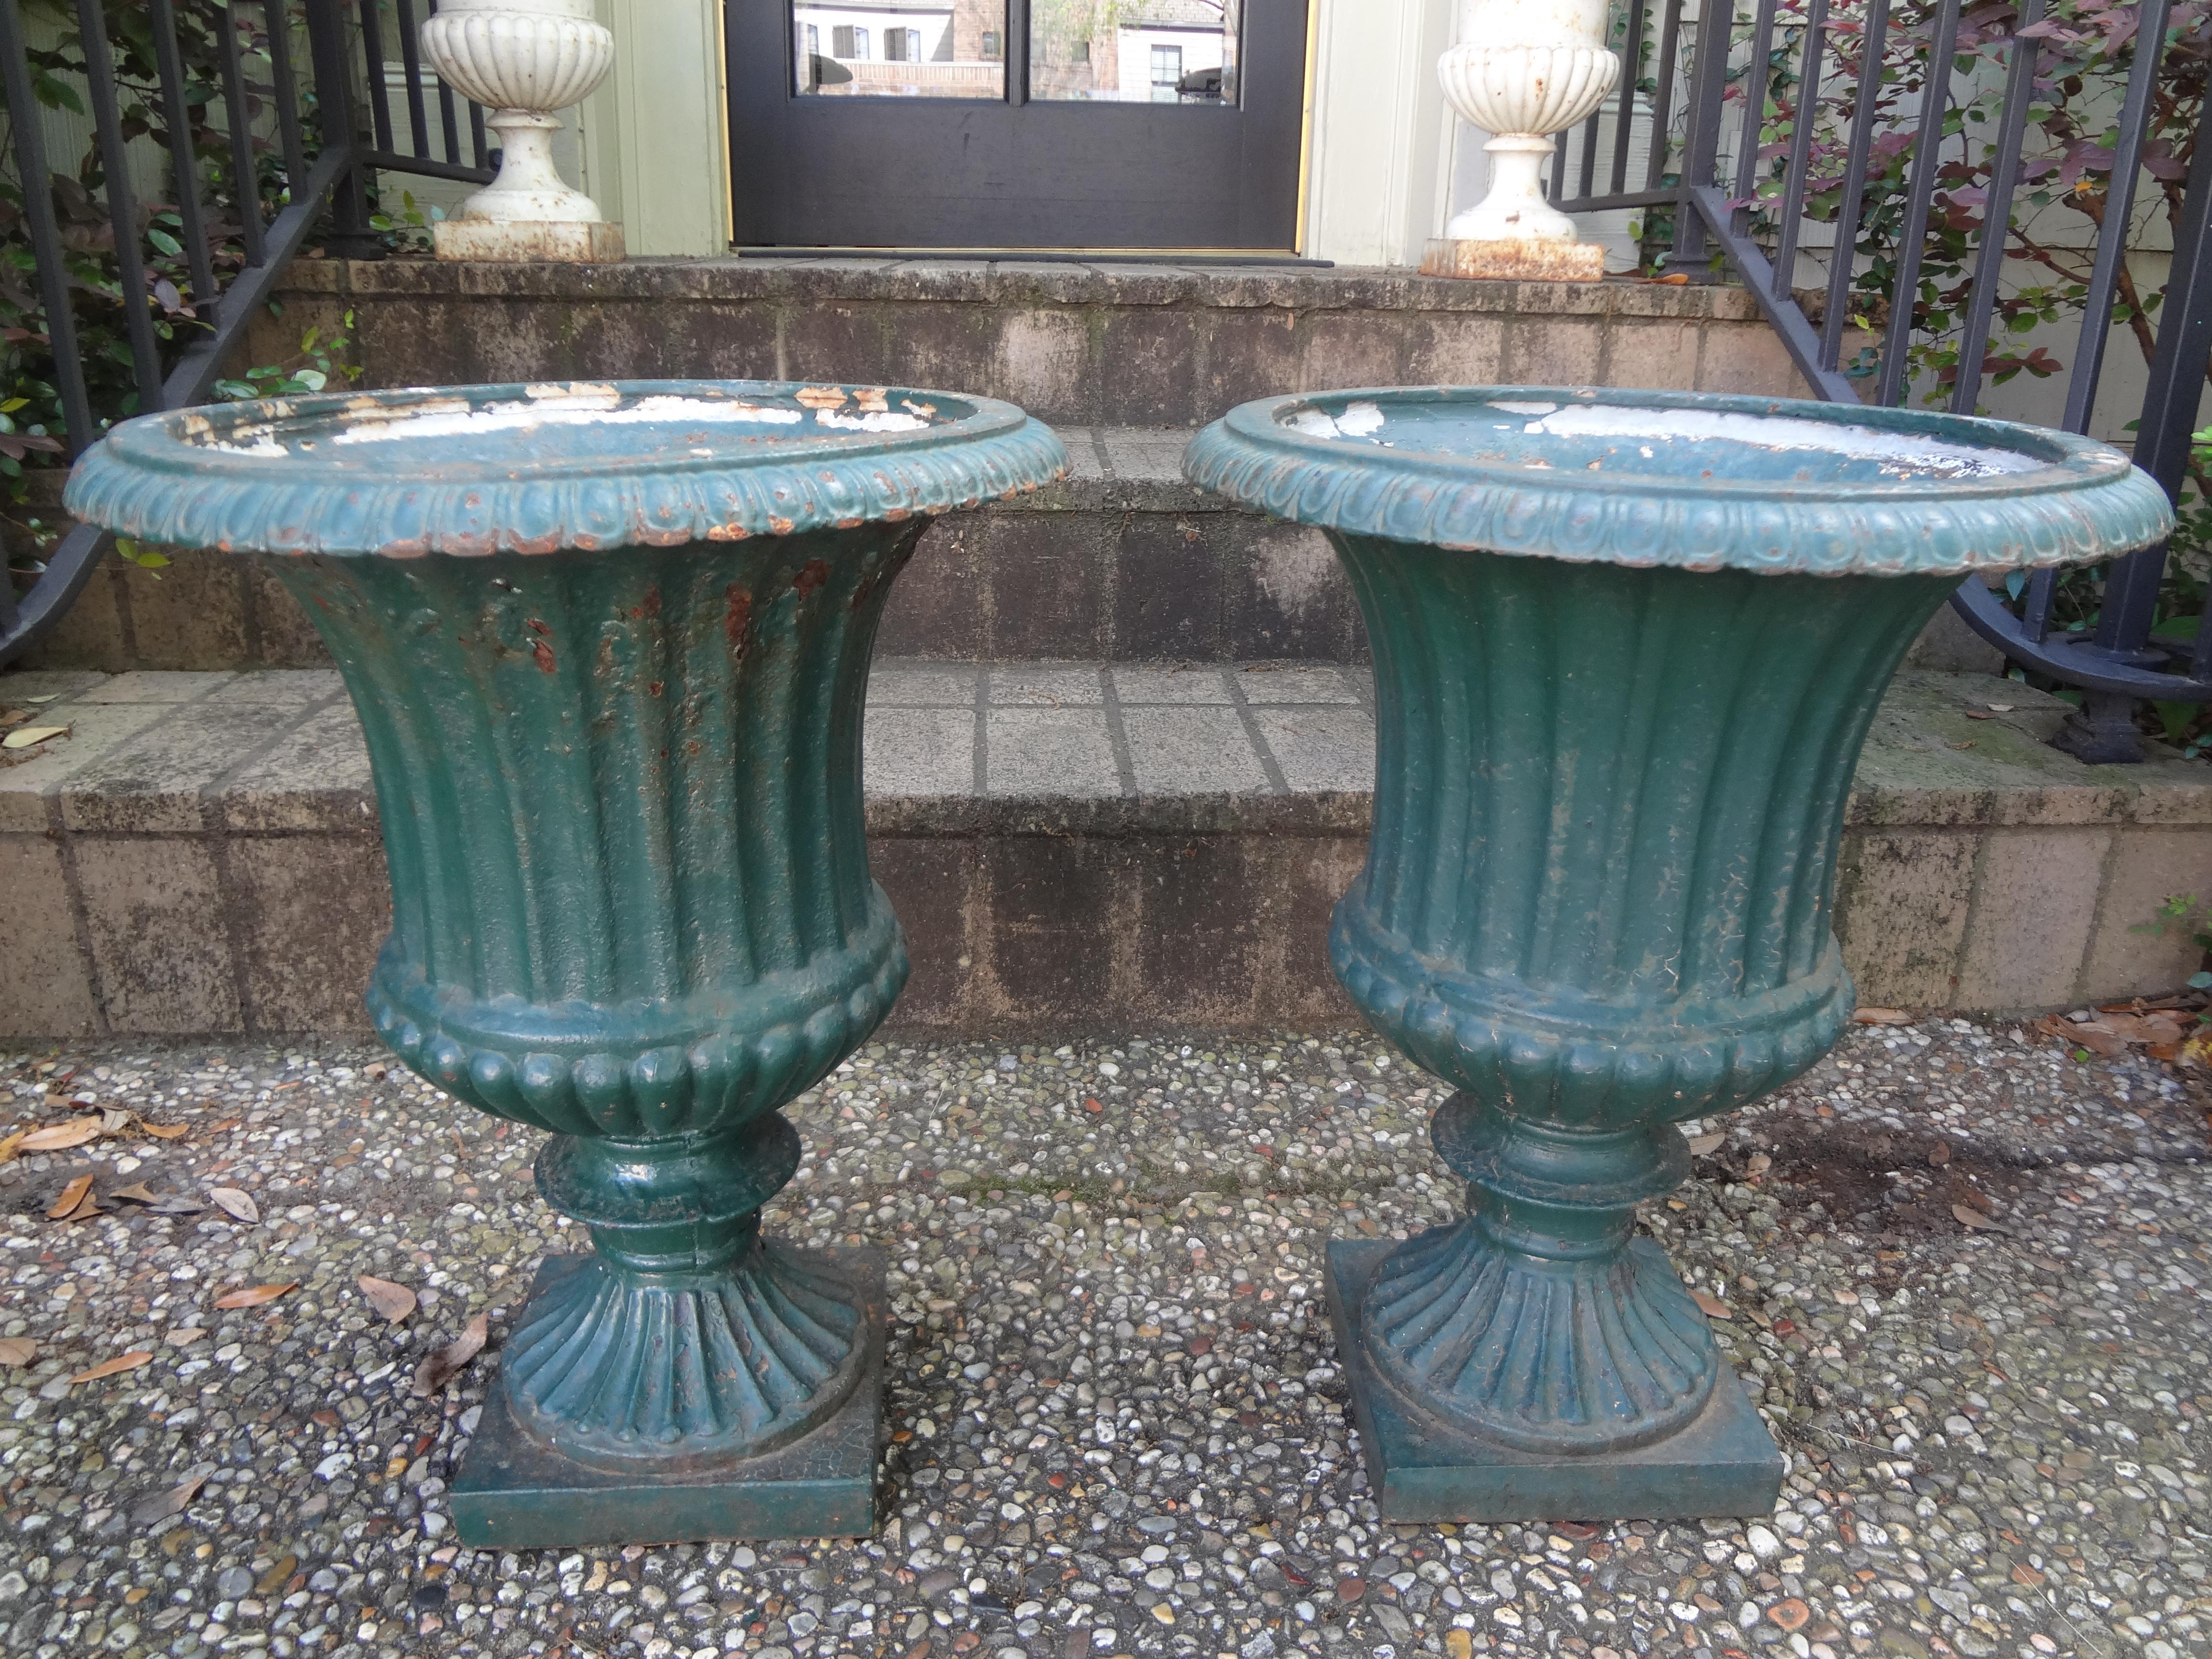 Lovely pair of antique French cast iron Campana garden urns, planters or jardinières. These beautiful Classic form French garden urns would make a lovely addition to your garden or can be used indoors. Deep well for planting of annuals or a